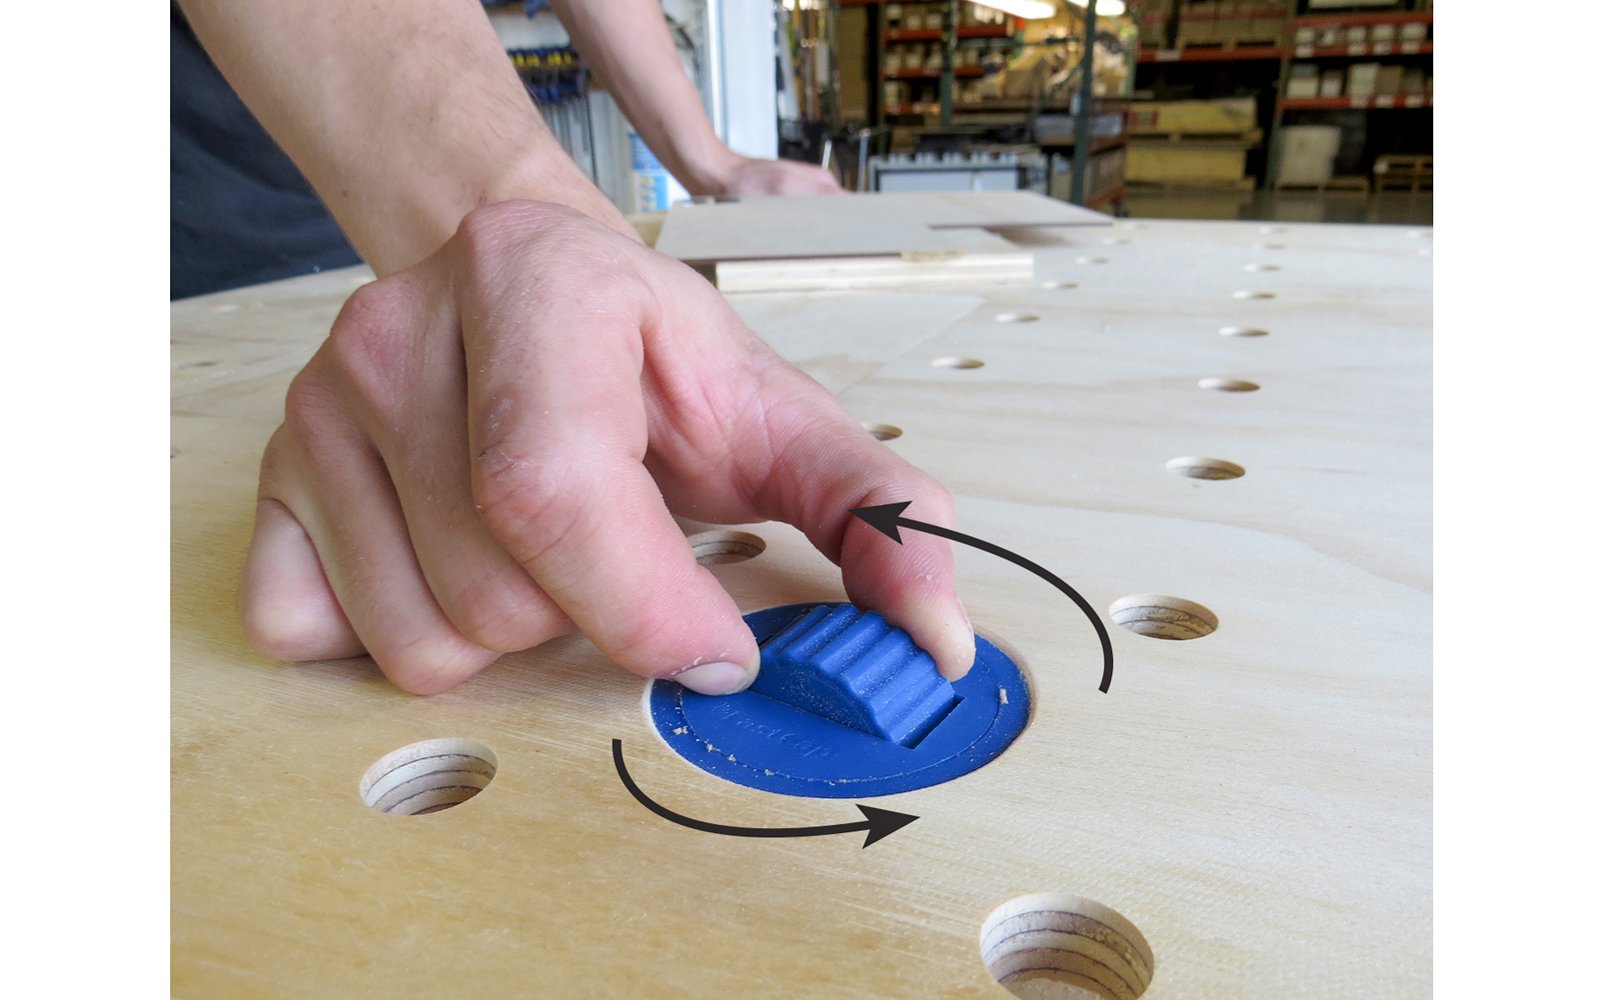 Four Pack - Gives functionality to your workbench when dogs are needed - 2-1/2" diameter - Model BLUE DOG 4PK - use a 2-1/2" hole saw to drill out a hole, sand the top edge, & press the Blue Dog down into the hole until flush - height adjustment for any material thickness & the turntable feature allows flexibility - 663807025111